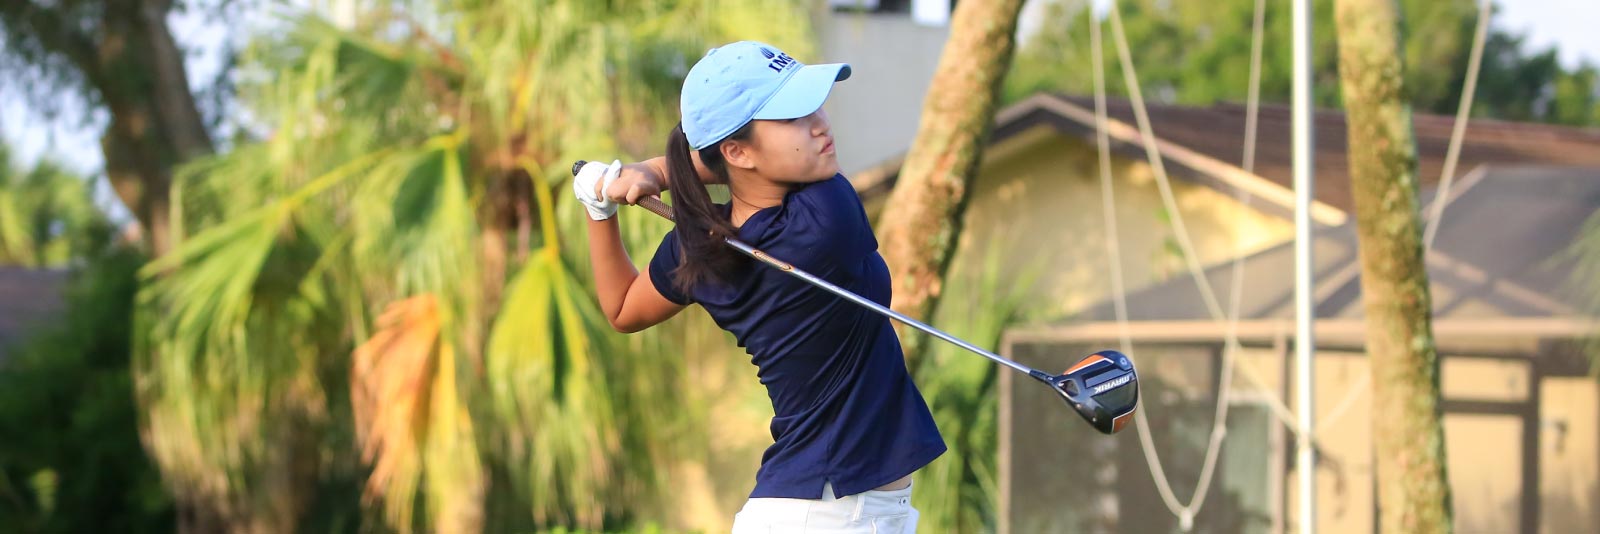 Women's College Golf Scores | How Do You Have to Be to Play